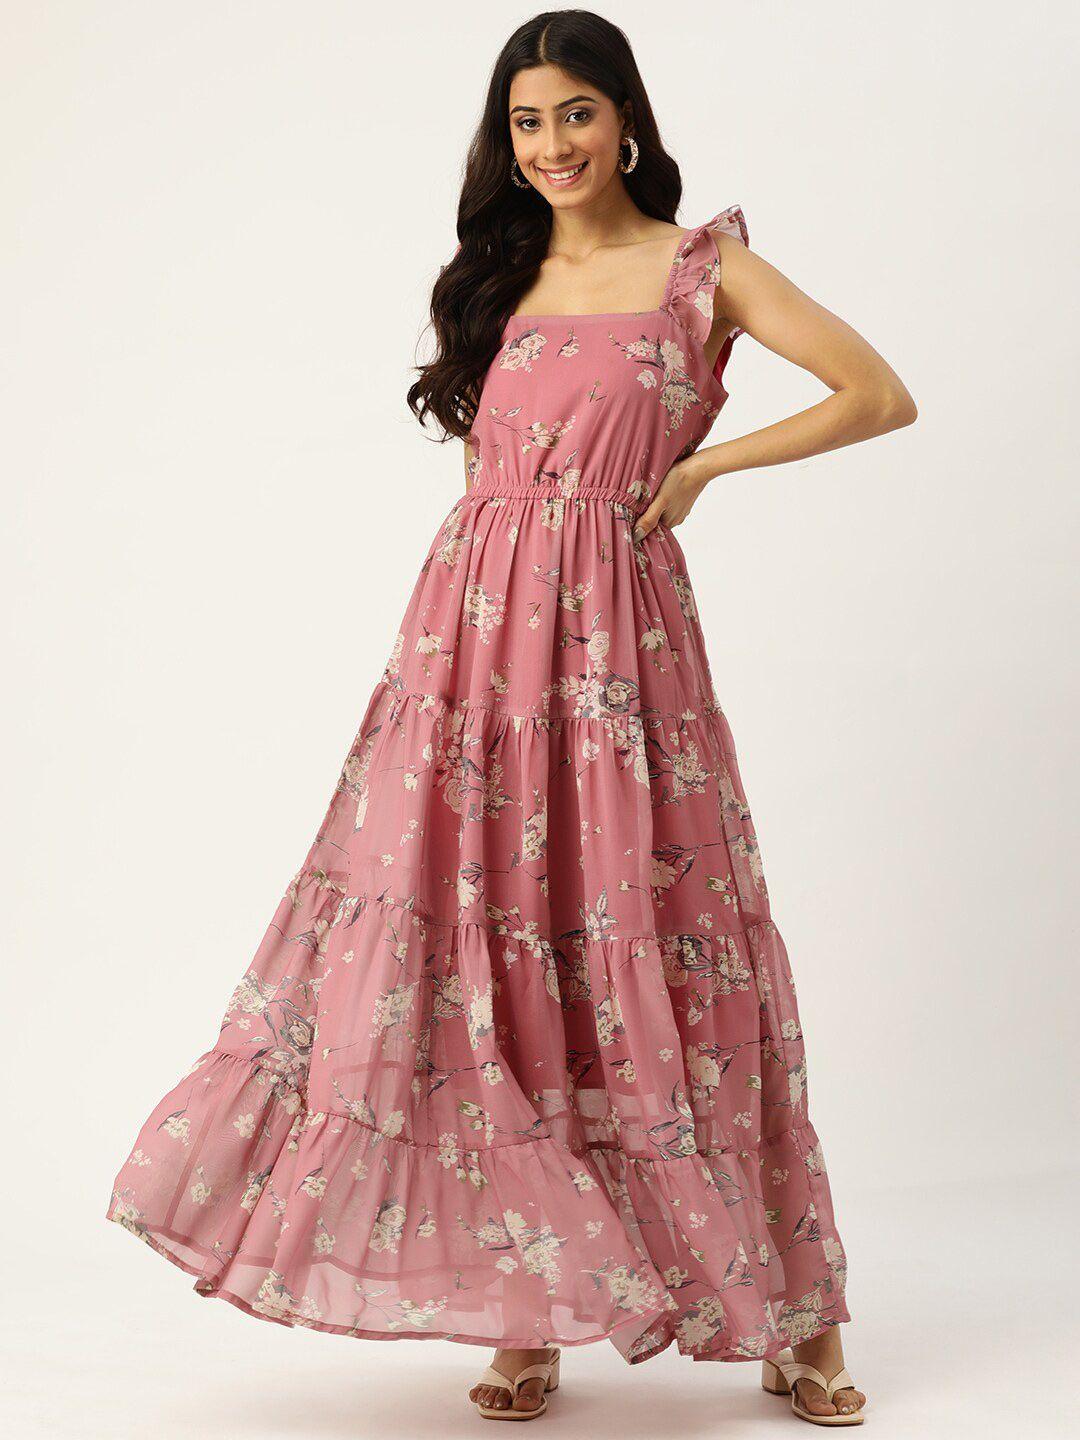 DressBerry Pink & Beige Floral Printed Ruffled Fit & Flare Dress